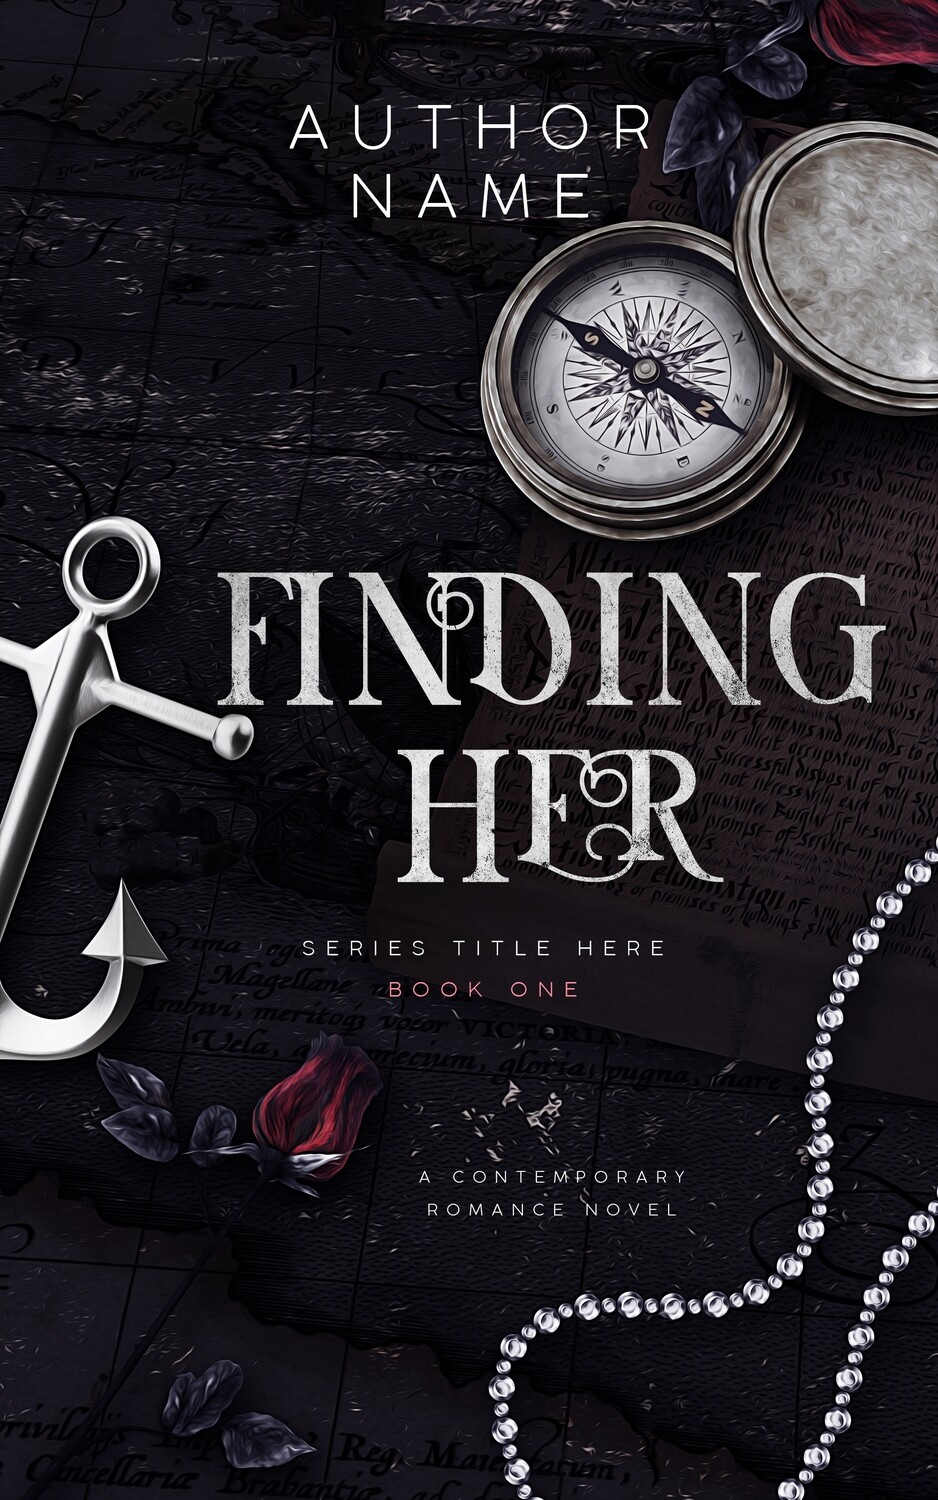 FINDING HER